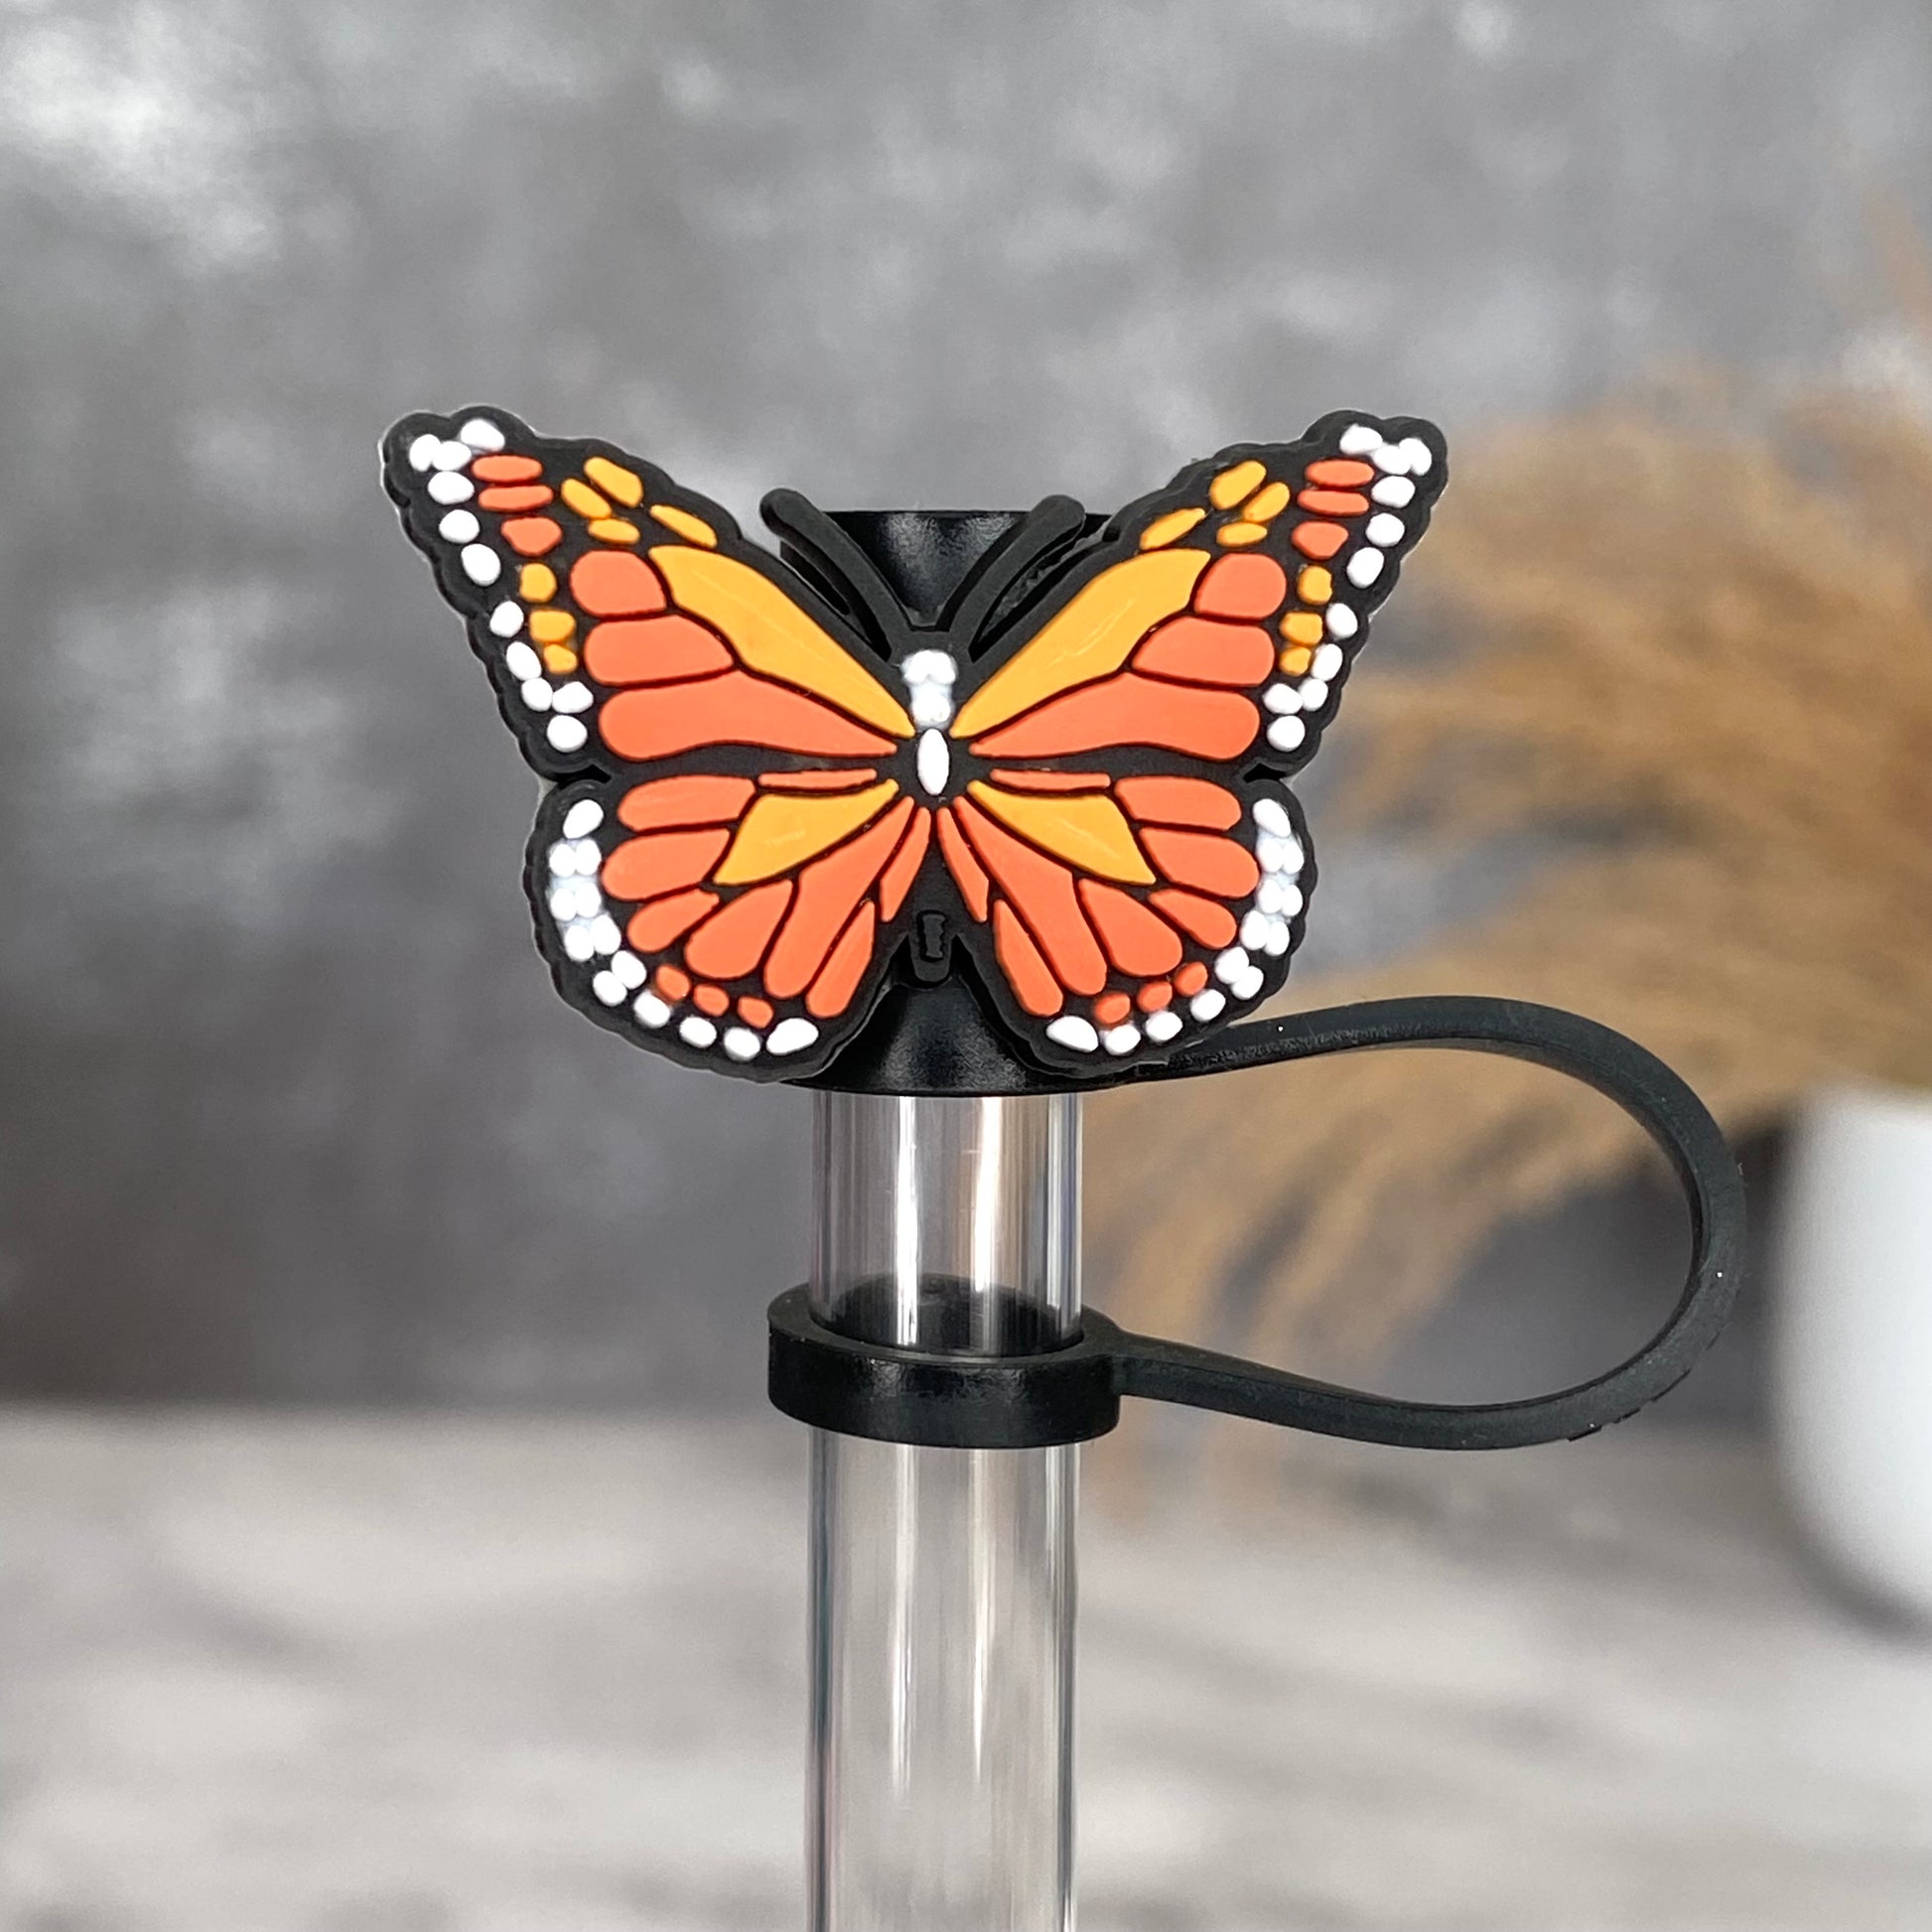 Reusable Straws Butterflies, Straw Covers Butterfly